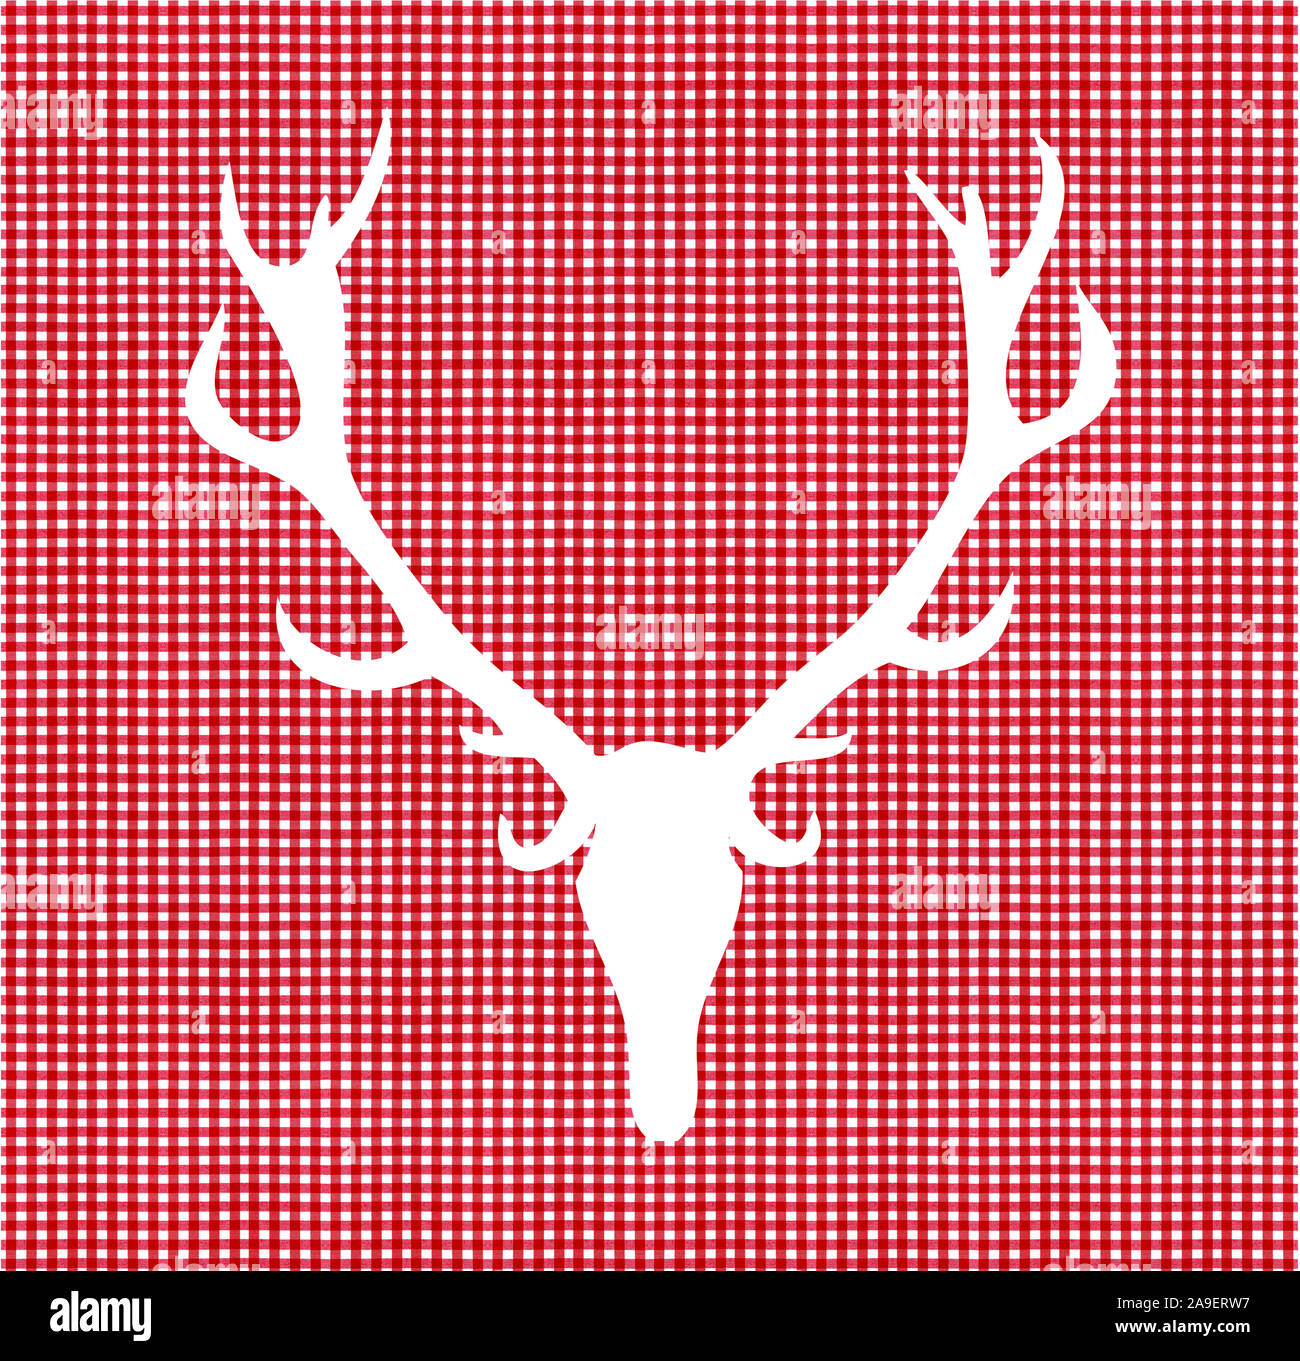 Red checked fabric with deer Stock Photo